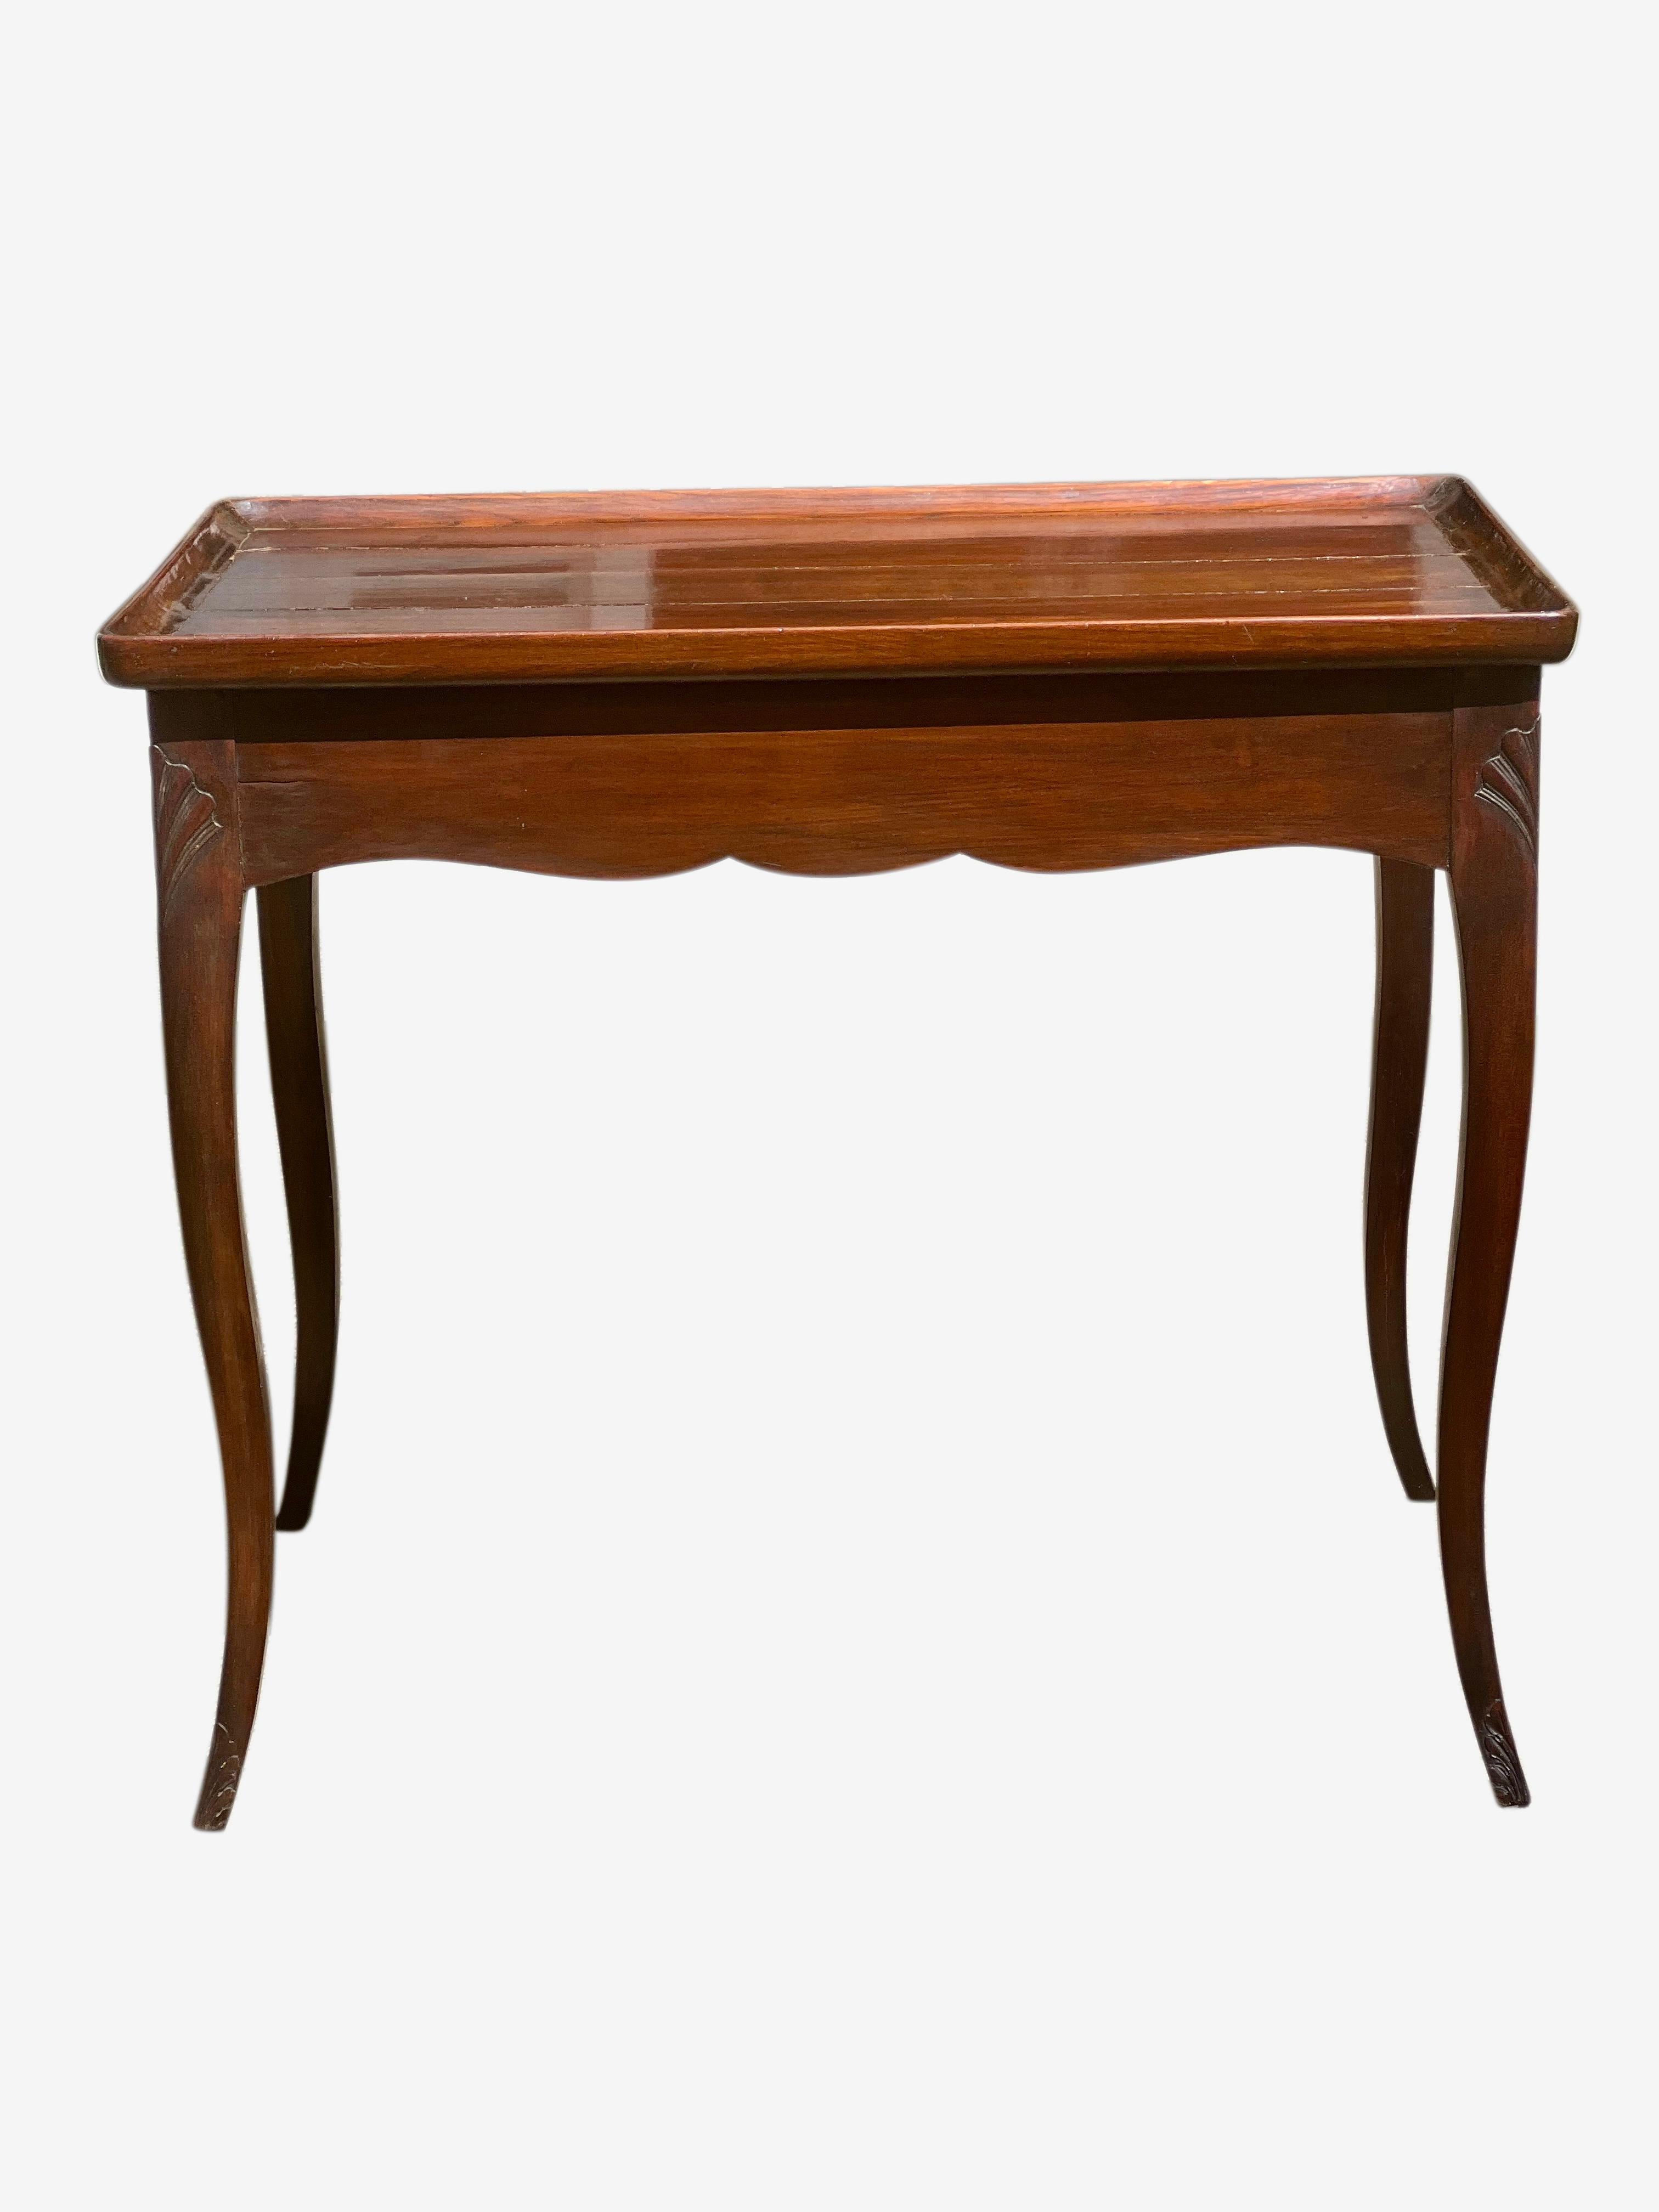 Antique French Provincial Mahogany Louis XV Style Side or Tea Table, circa 1900 For Sale 1